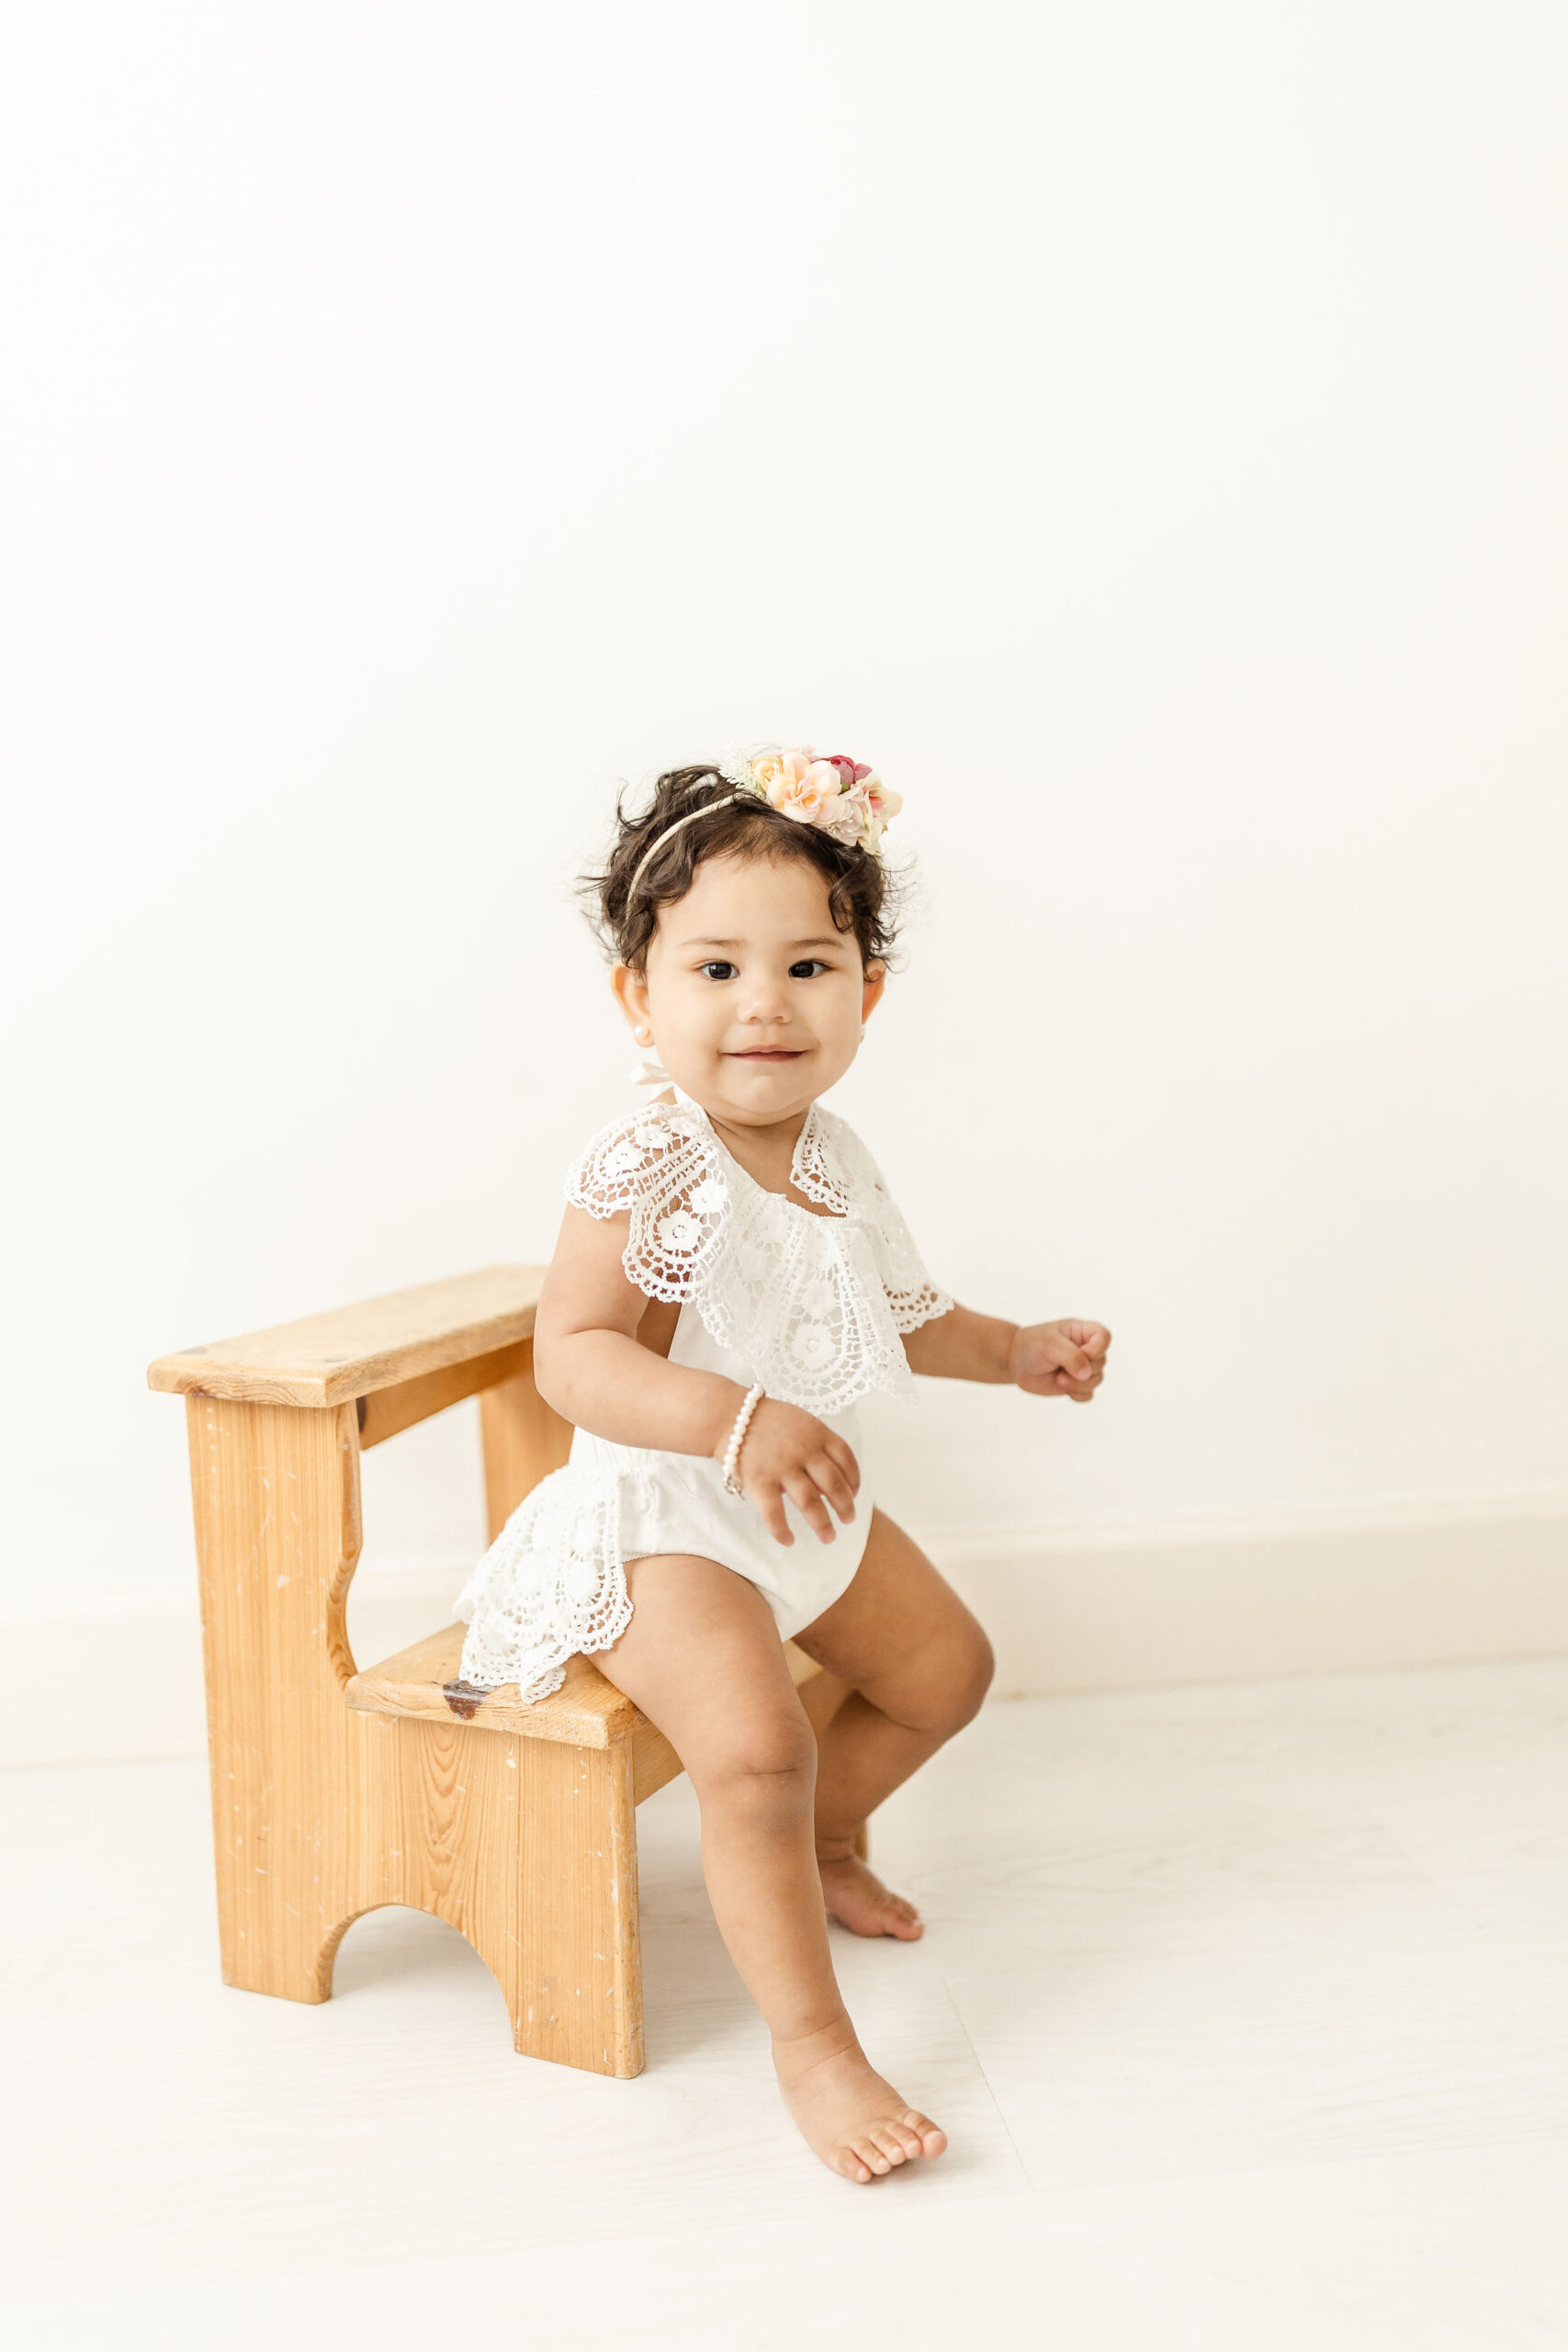 A young toddler girl sits on a wooden step stool in a studio wearing a white onesie with a large white lace collar and skirt boy meets girl miami